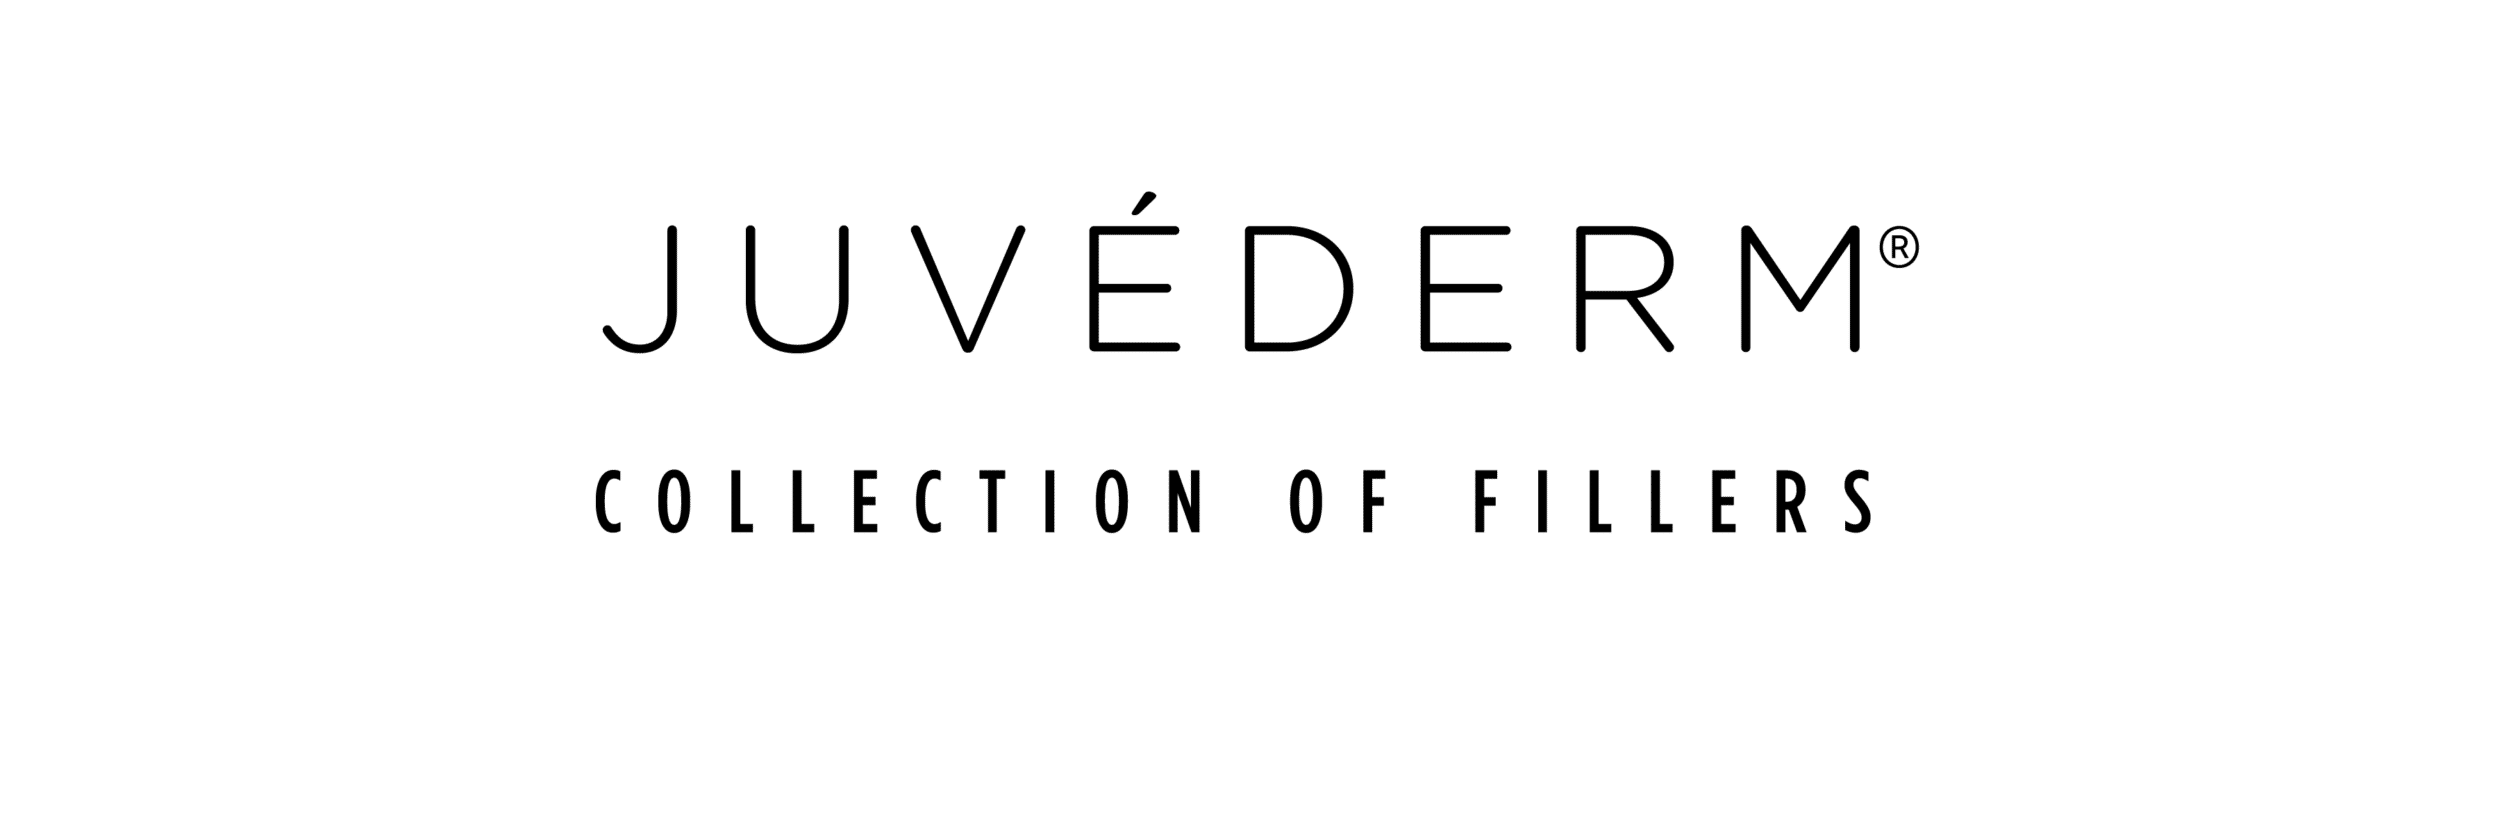 Juvederm NEW Pro COLLECTION OF FILLERS K